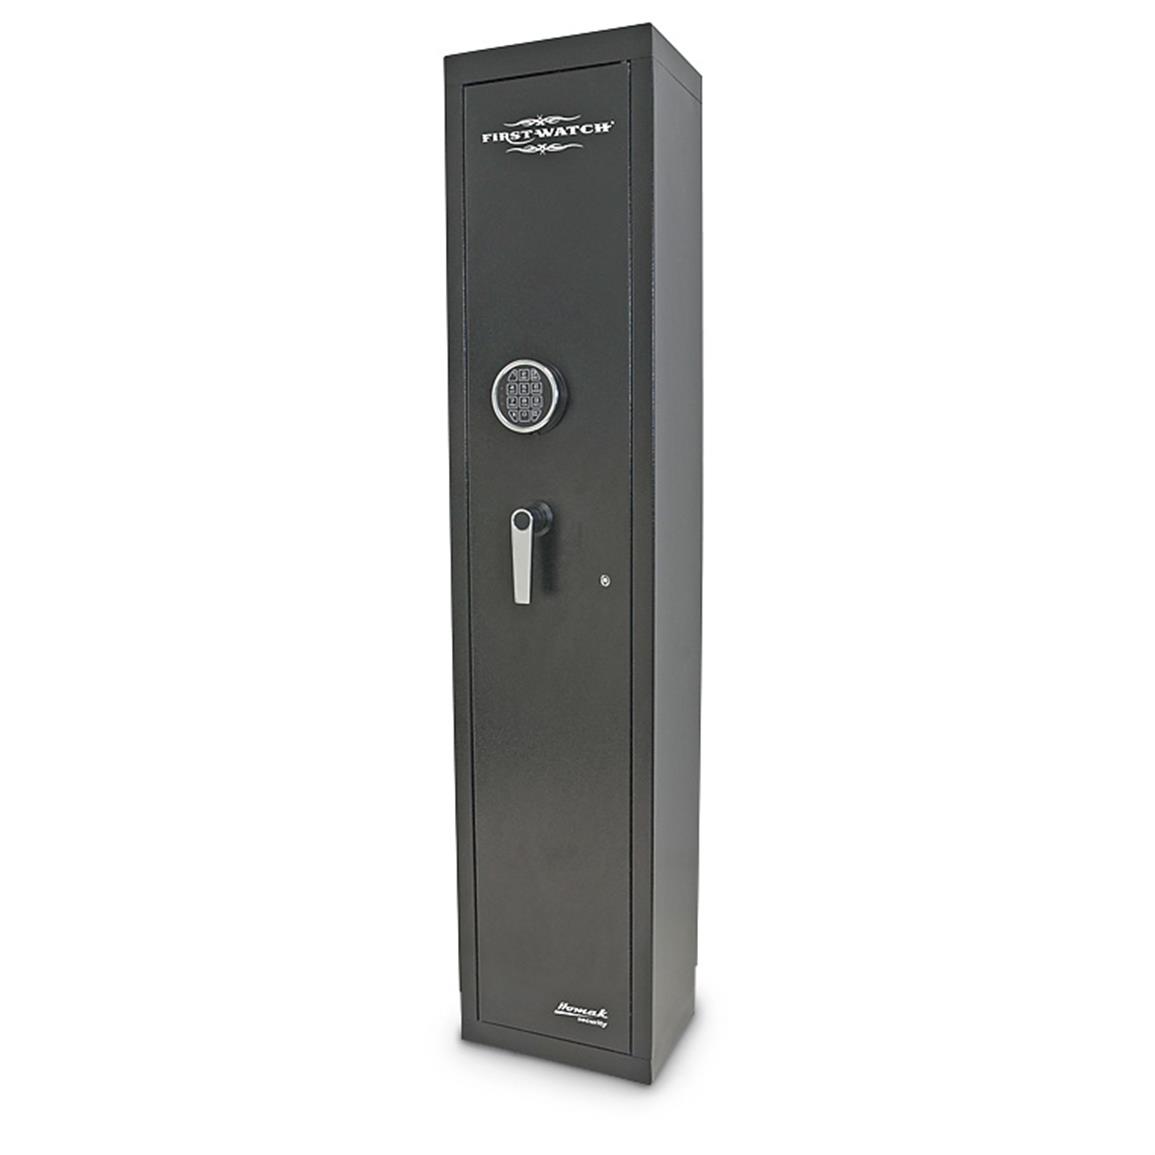 First Watch 5 Gun Rta Security Cabinet With Electronic Locking